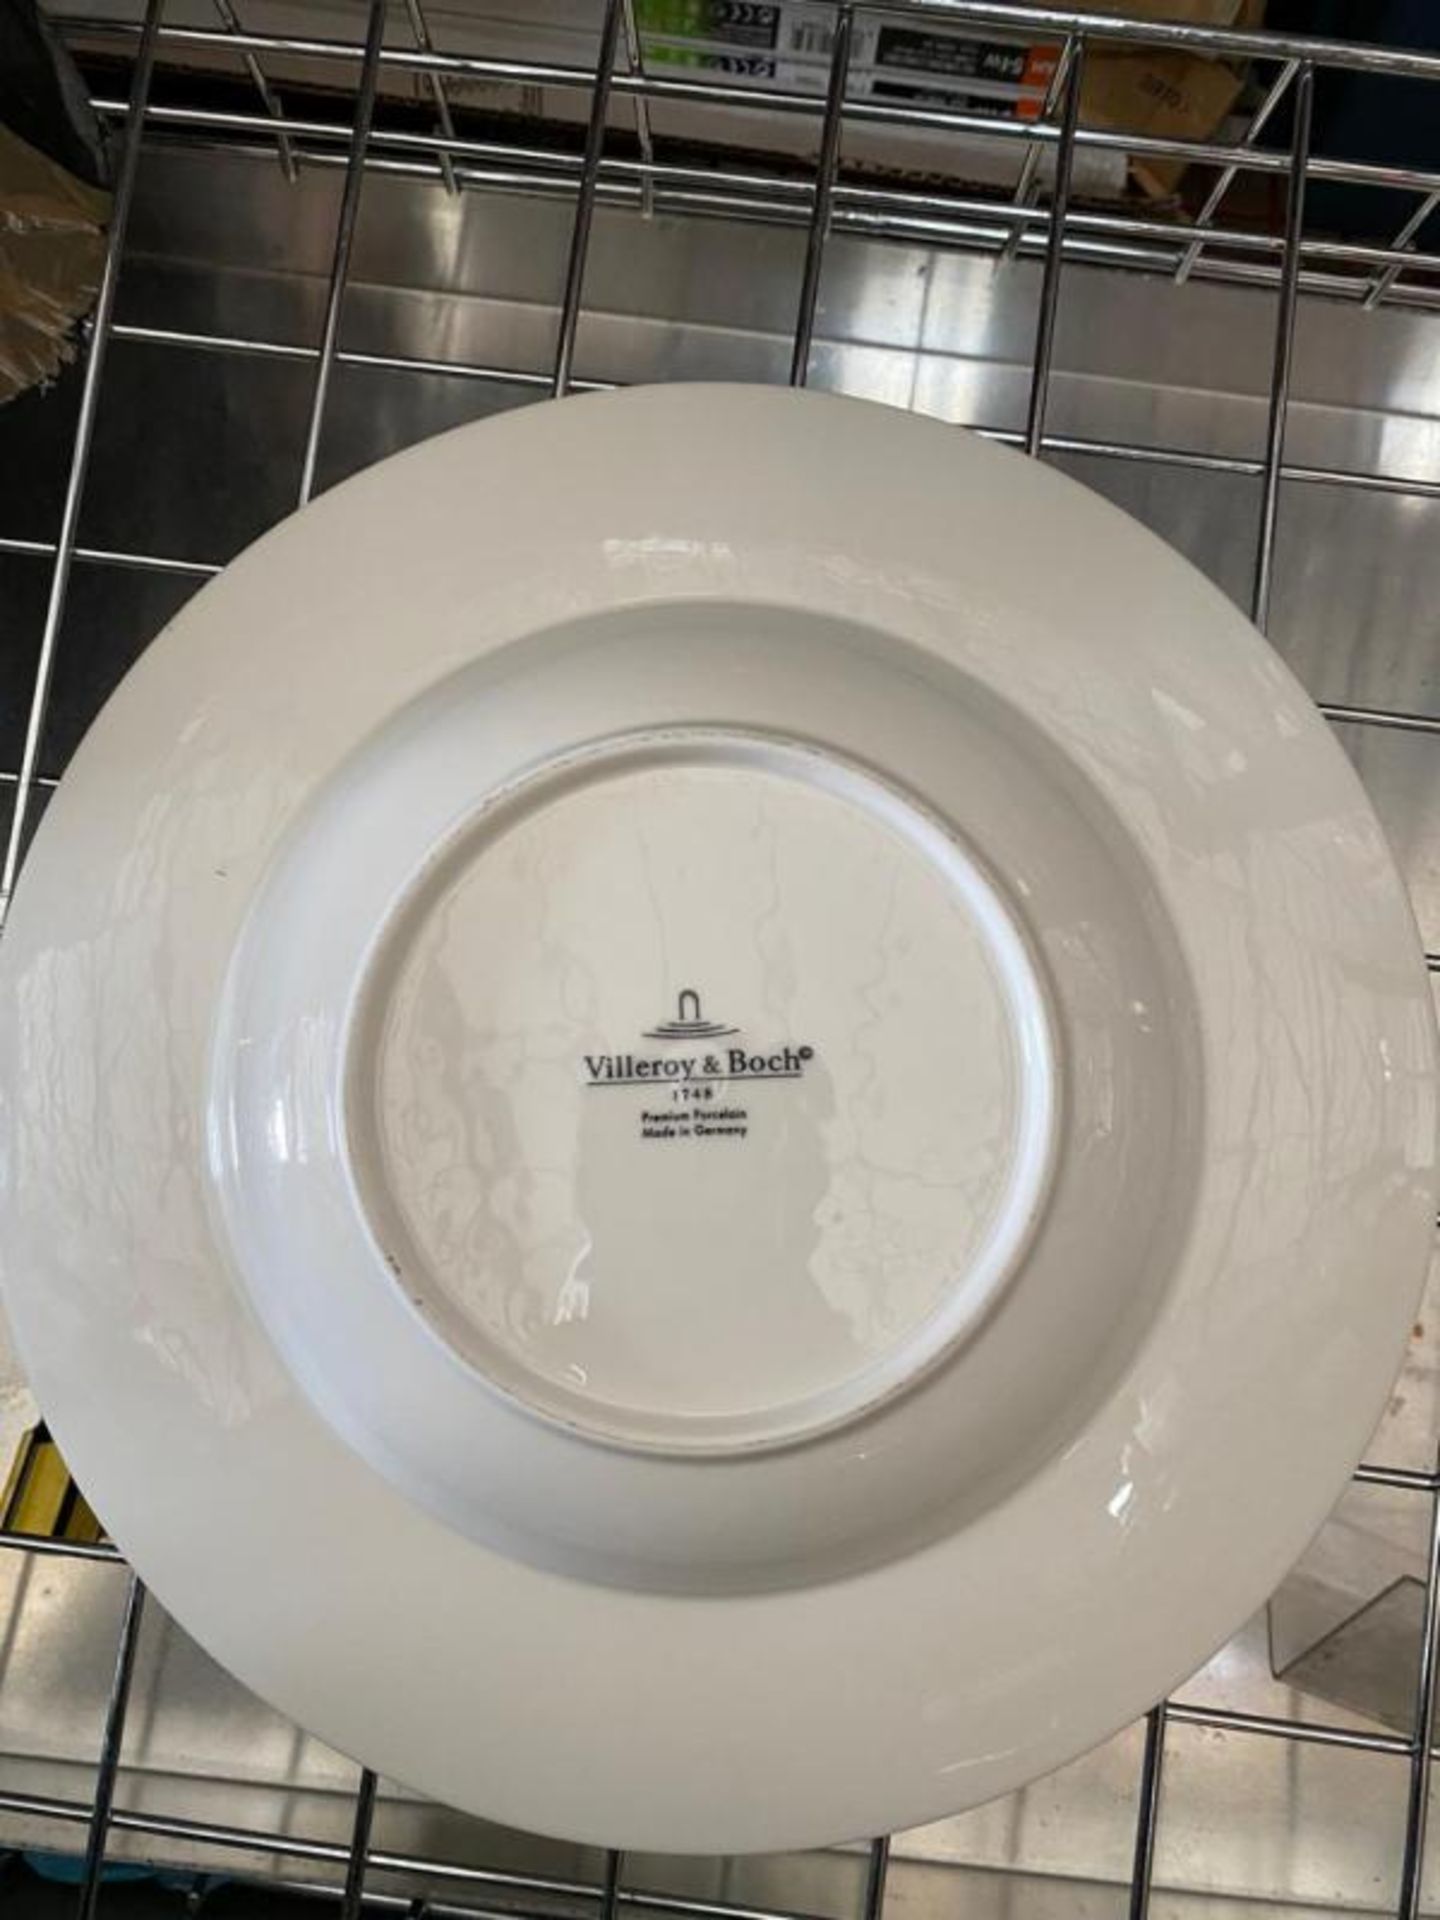 6 x Villeroy & Boch Royal Dinner Plate -290mm (29cm) - Ref: 1044122620 - New and boxed - CL011 - MC5 - Image 4 of 5